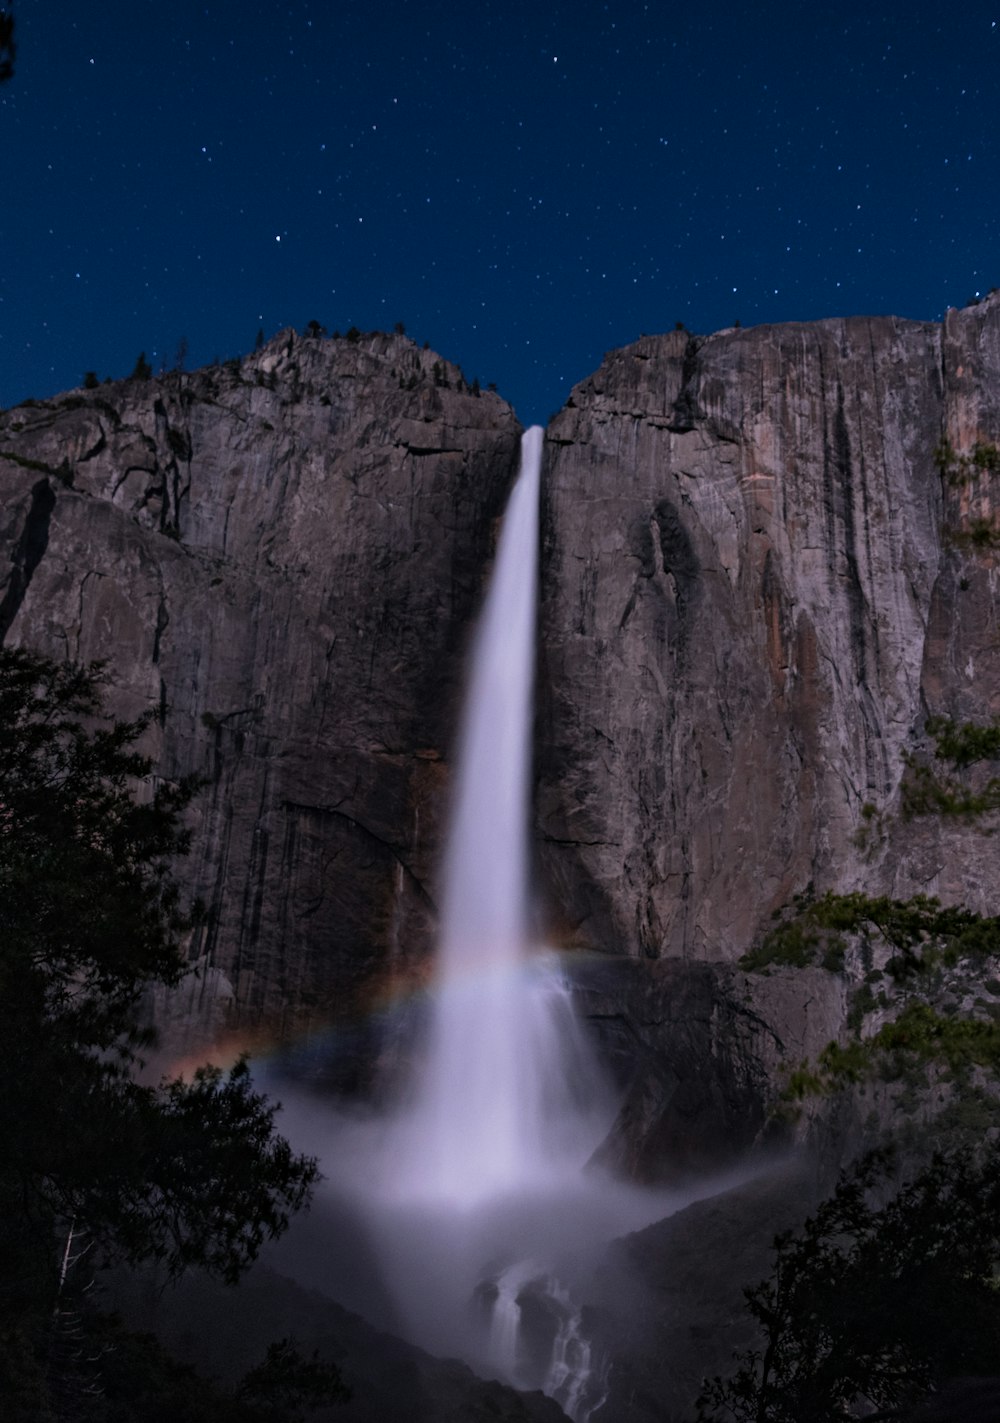 rainbow in front of waterfalls at night time photo – Free Nature Image on  Unsplash